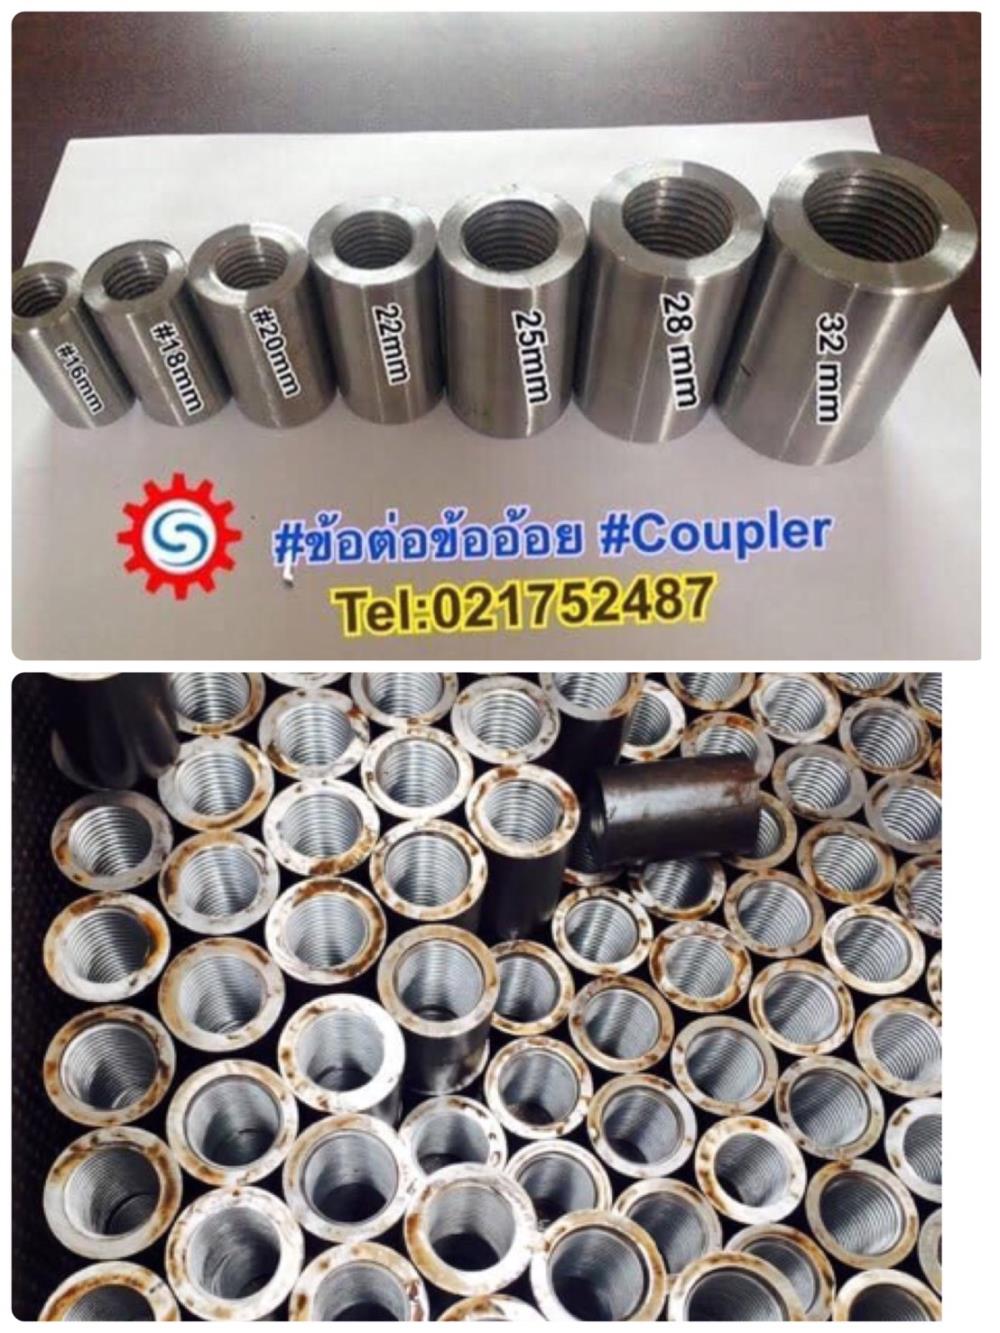 Rebar and Coupler for construction Threading